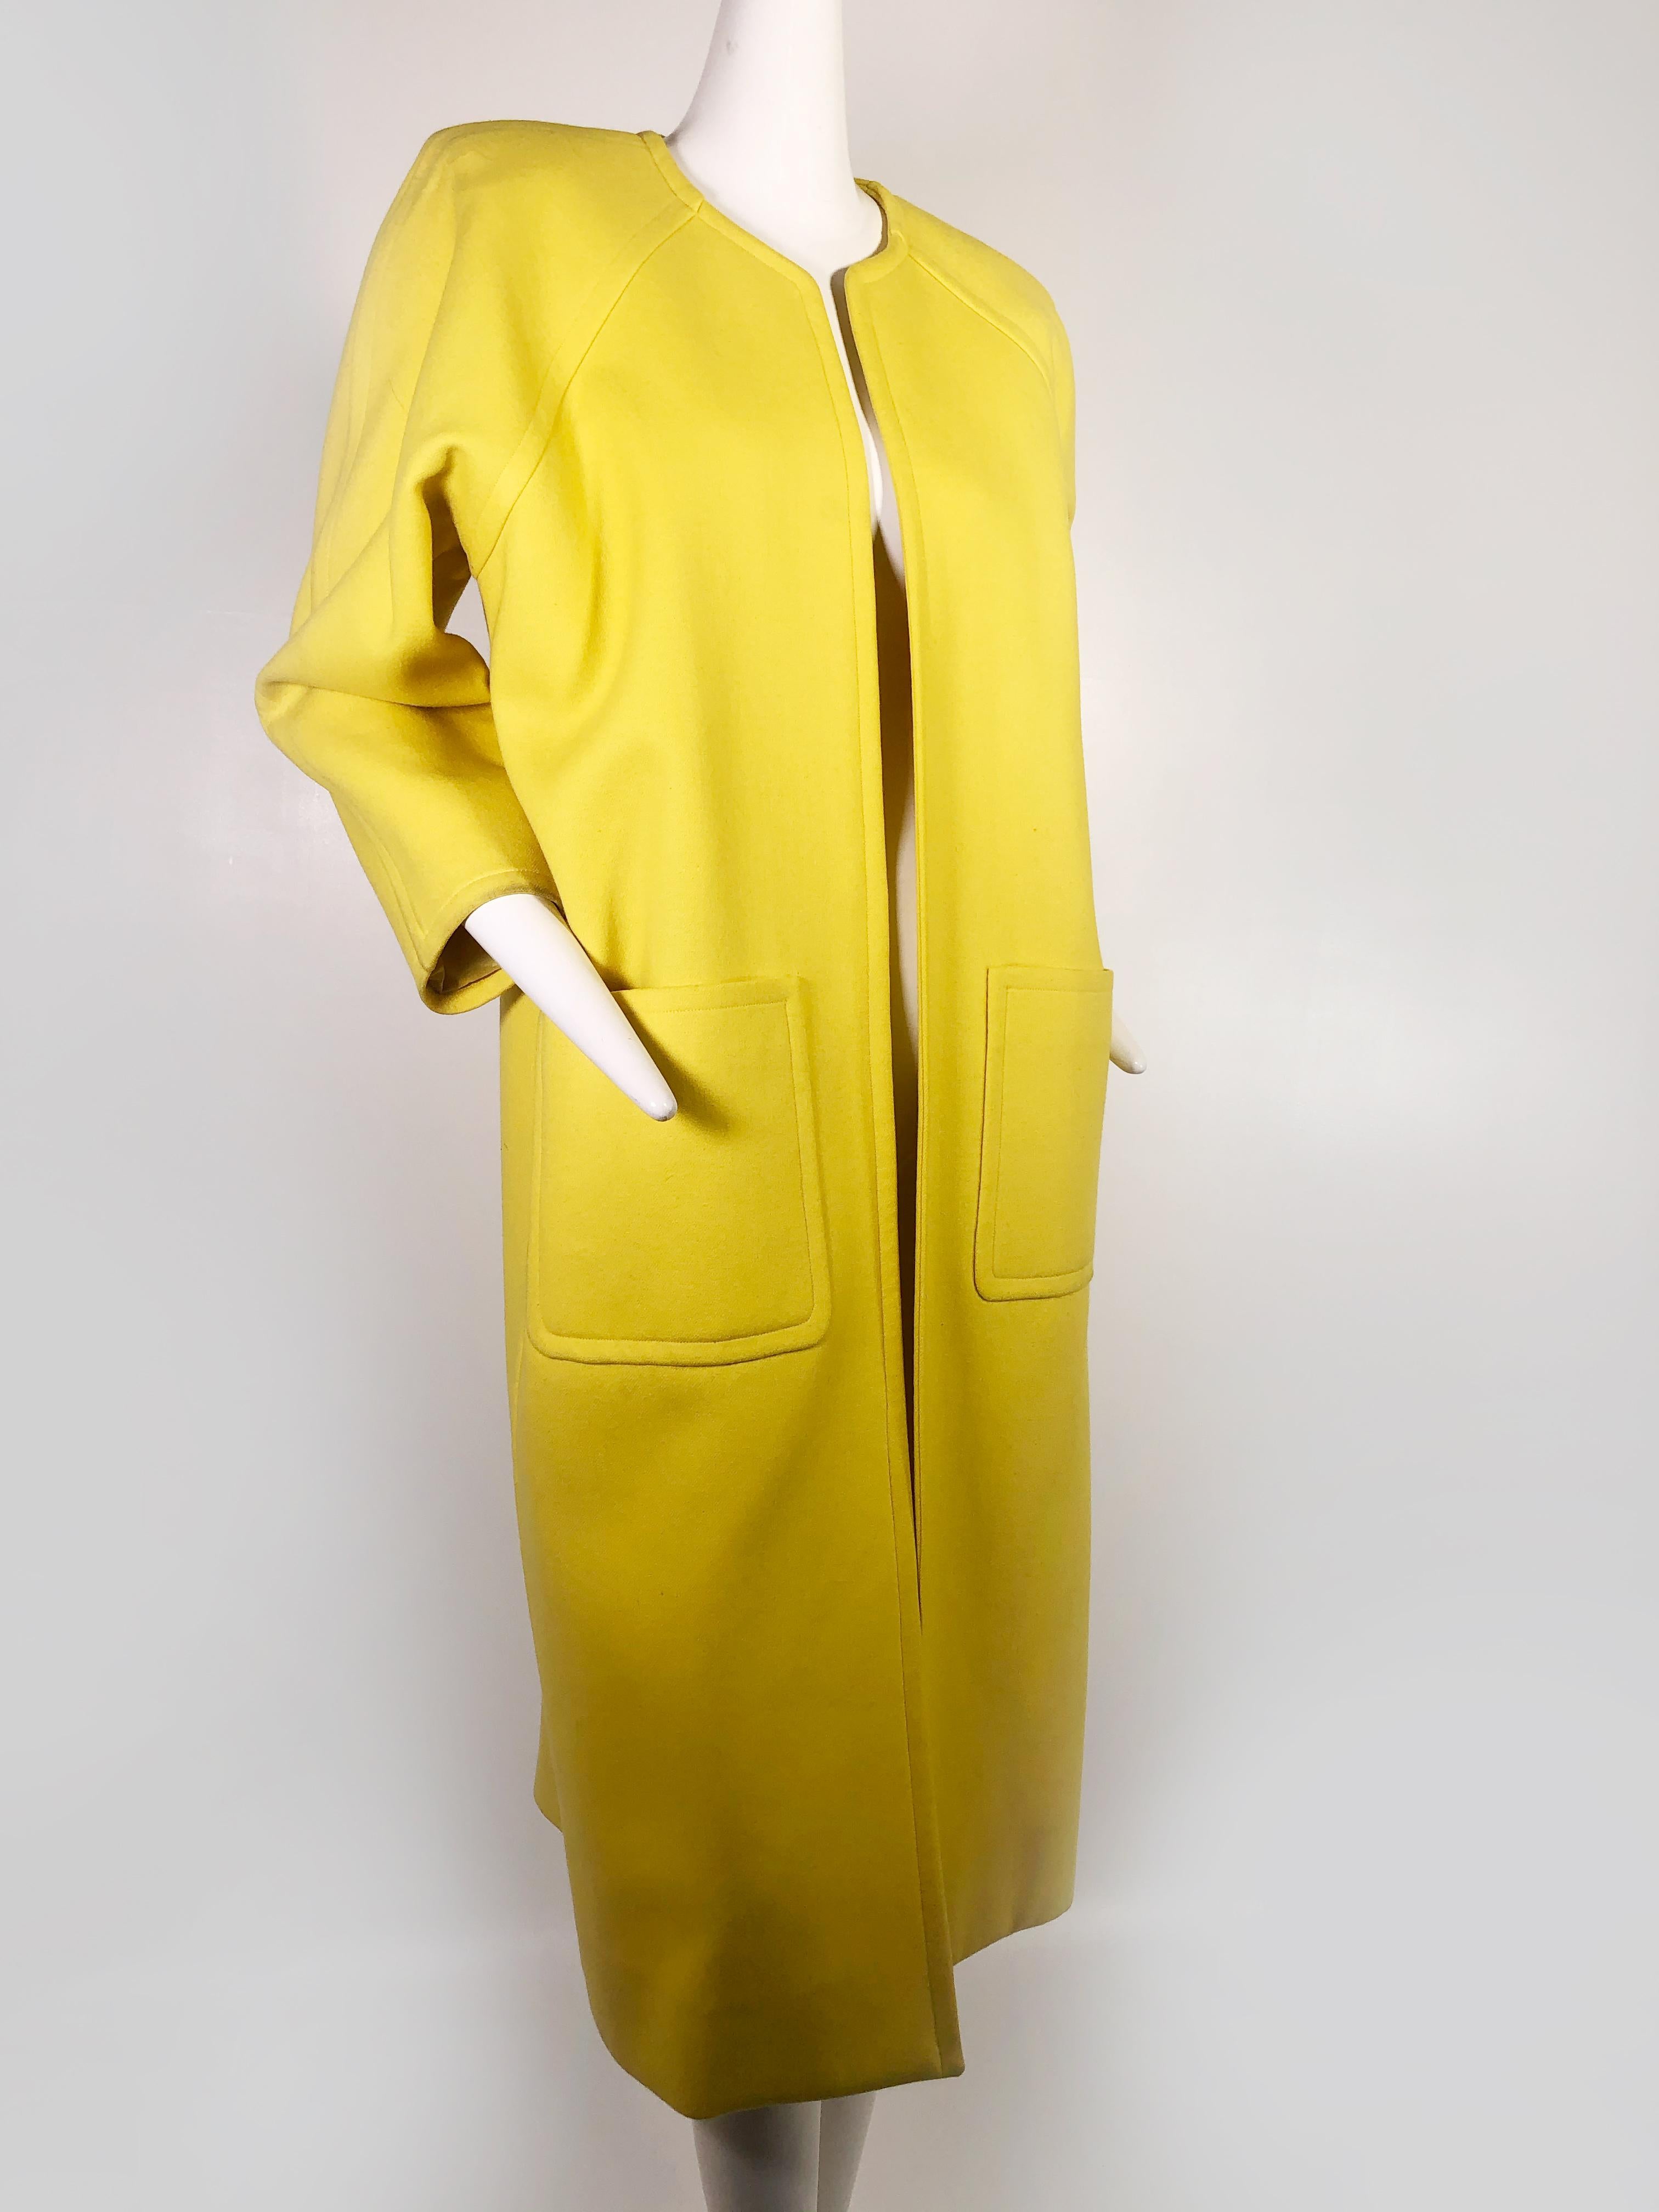 Women's 1980s Canary Yellow Wool Coat with Deep Hip Pockets and Raglan Sleeves